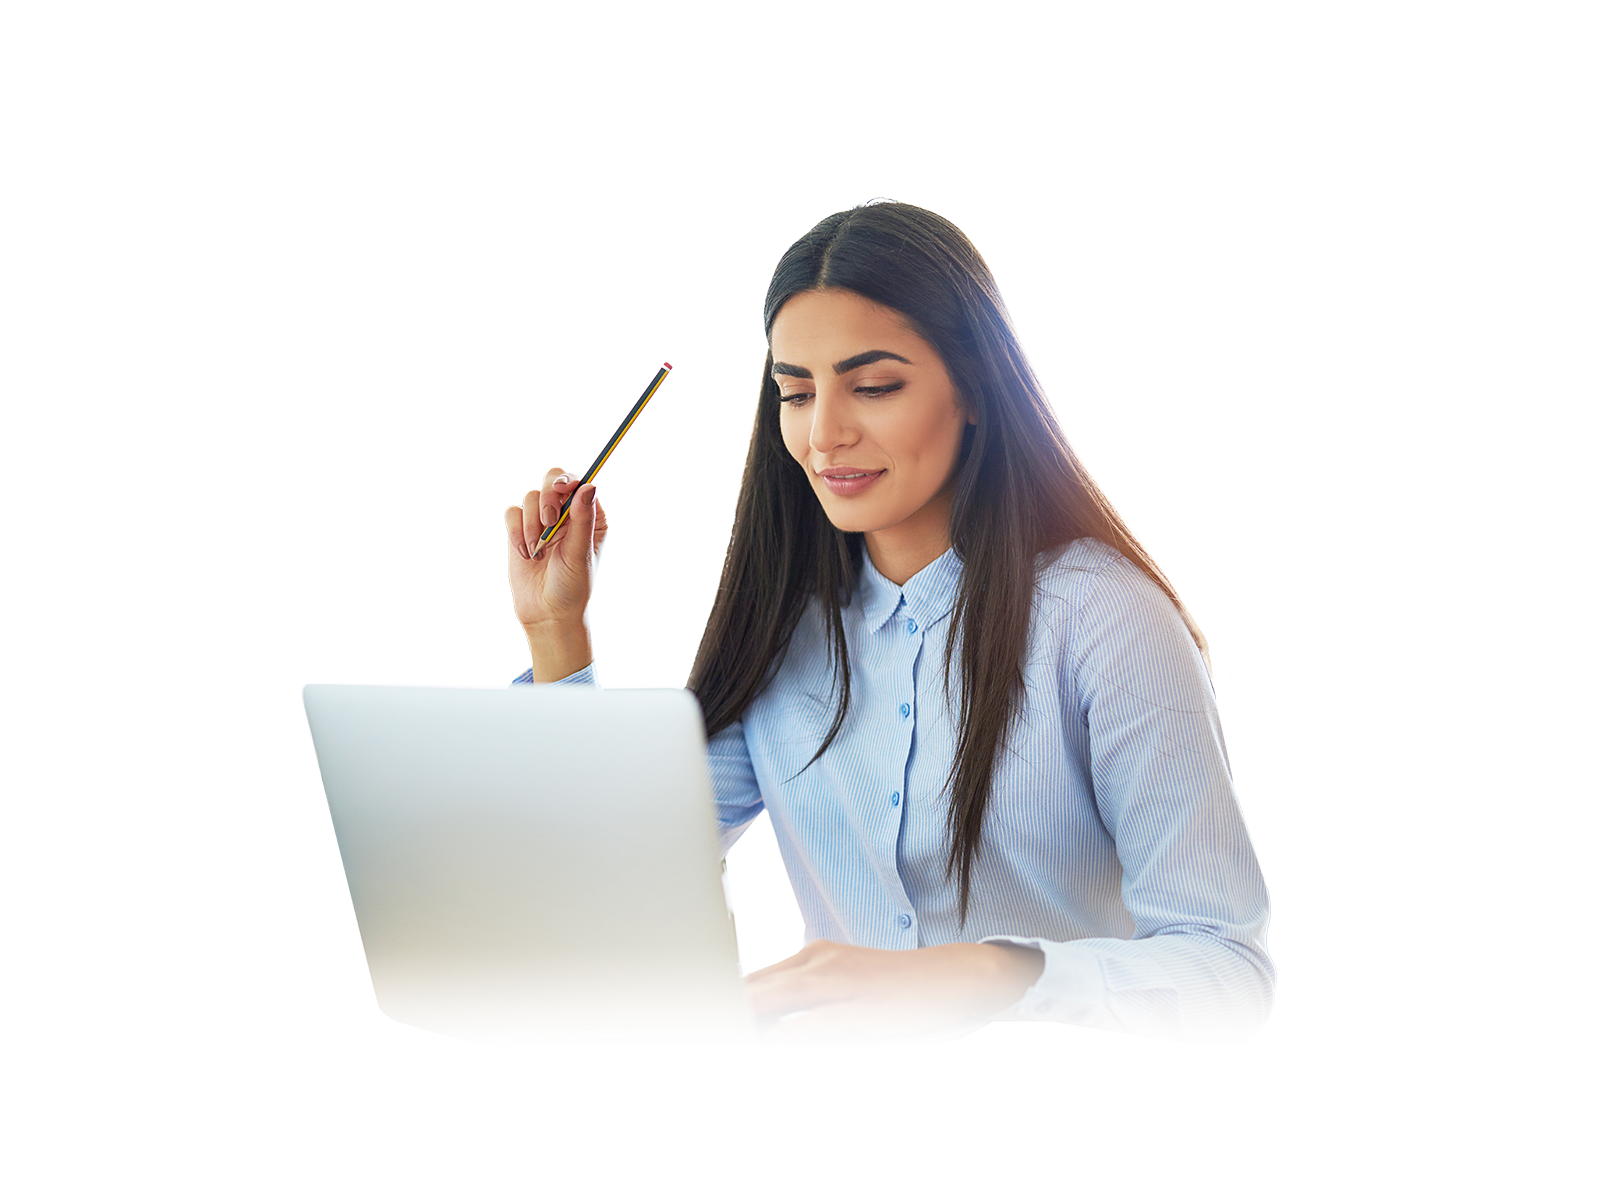 A data scientist holds a pencil and works on a latop with background graphics depicting data and interpersonal connections and communication.